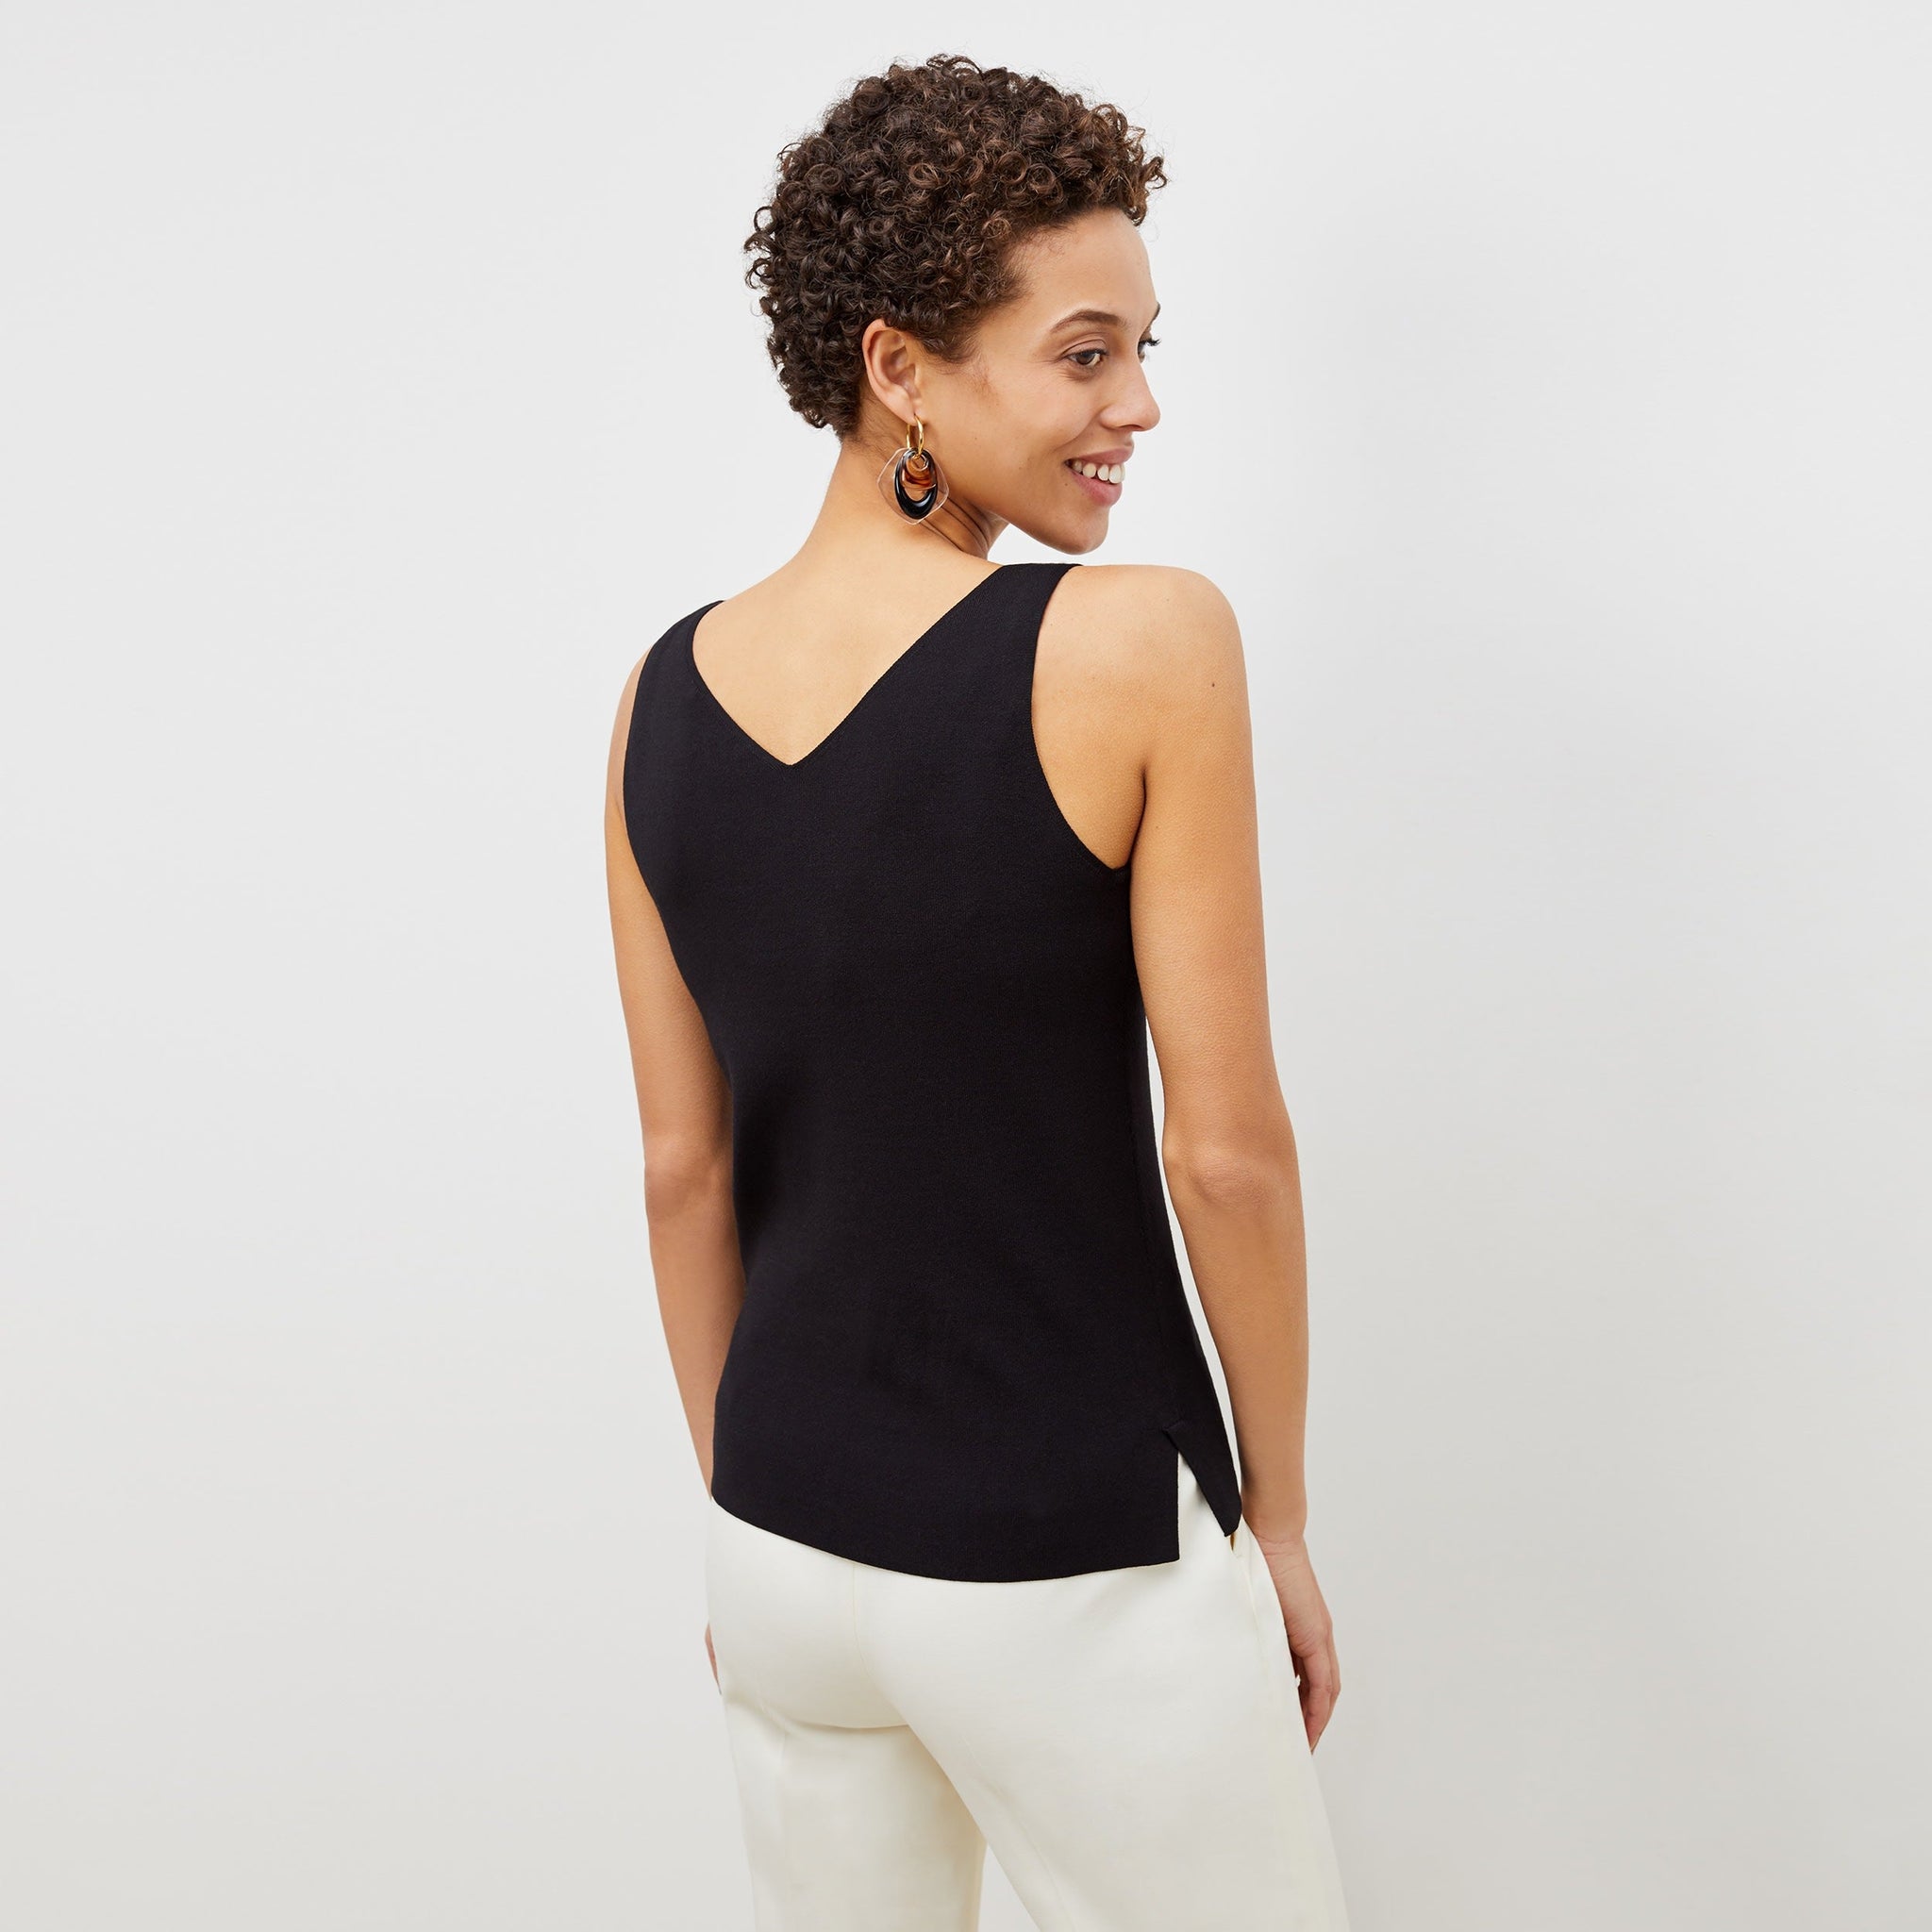 back image of a woman wearing the peggy top in black